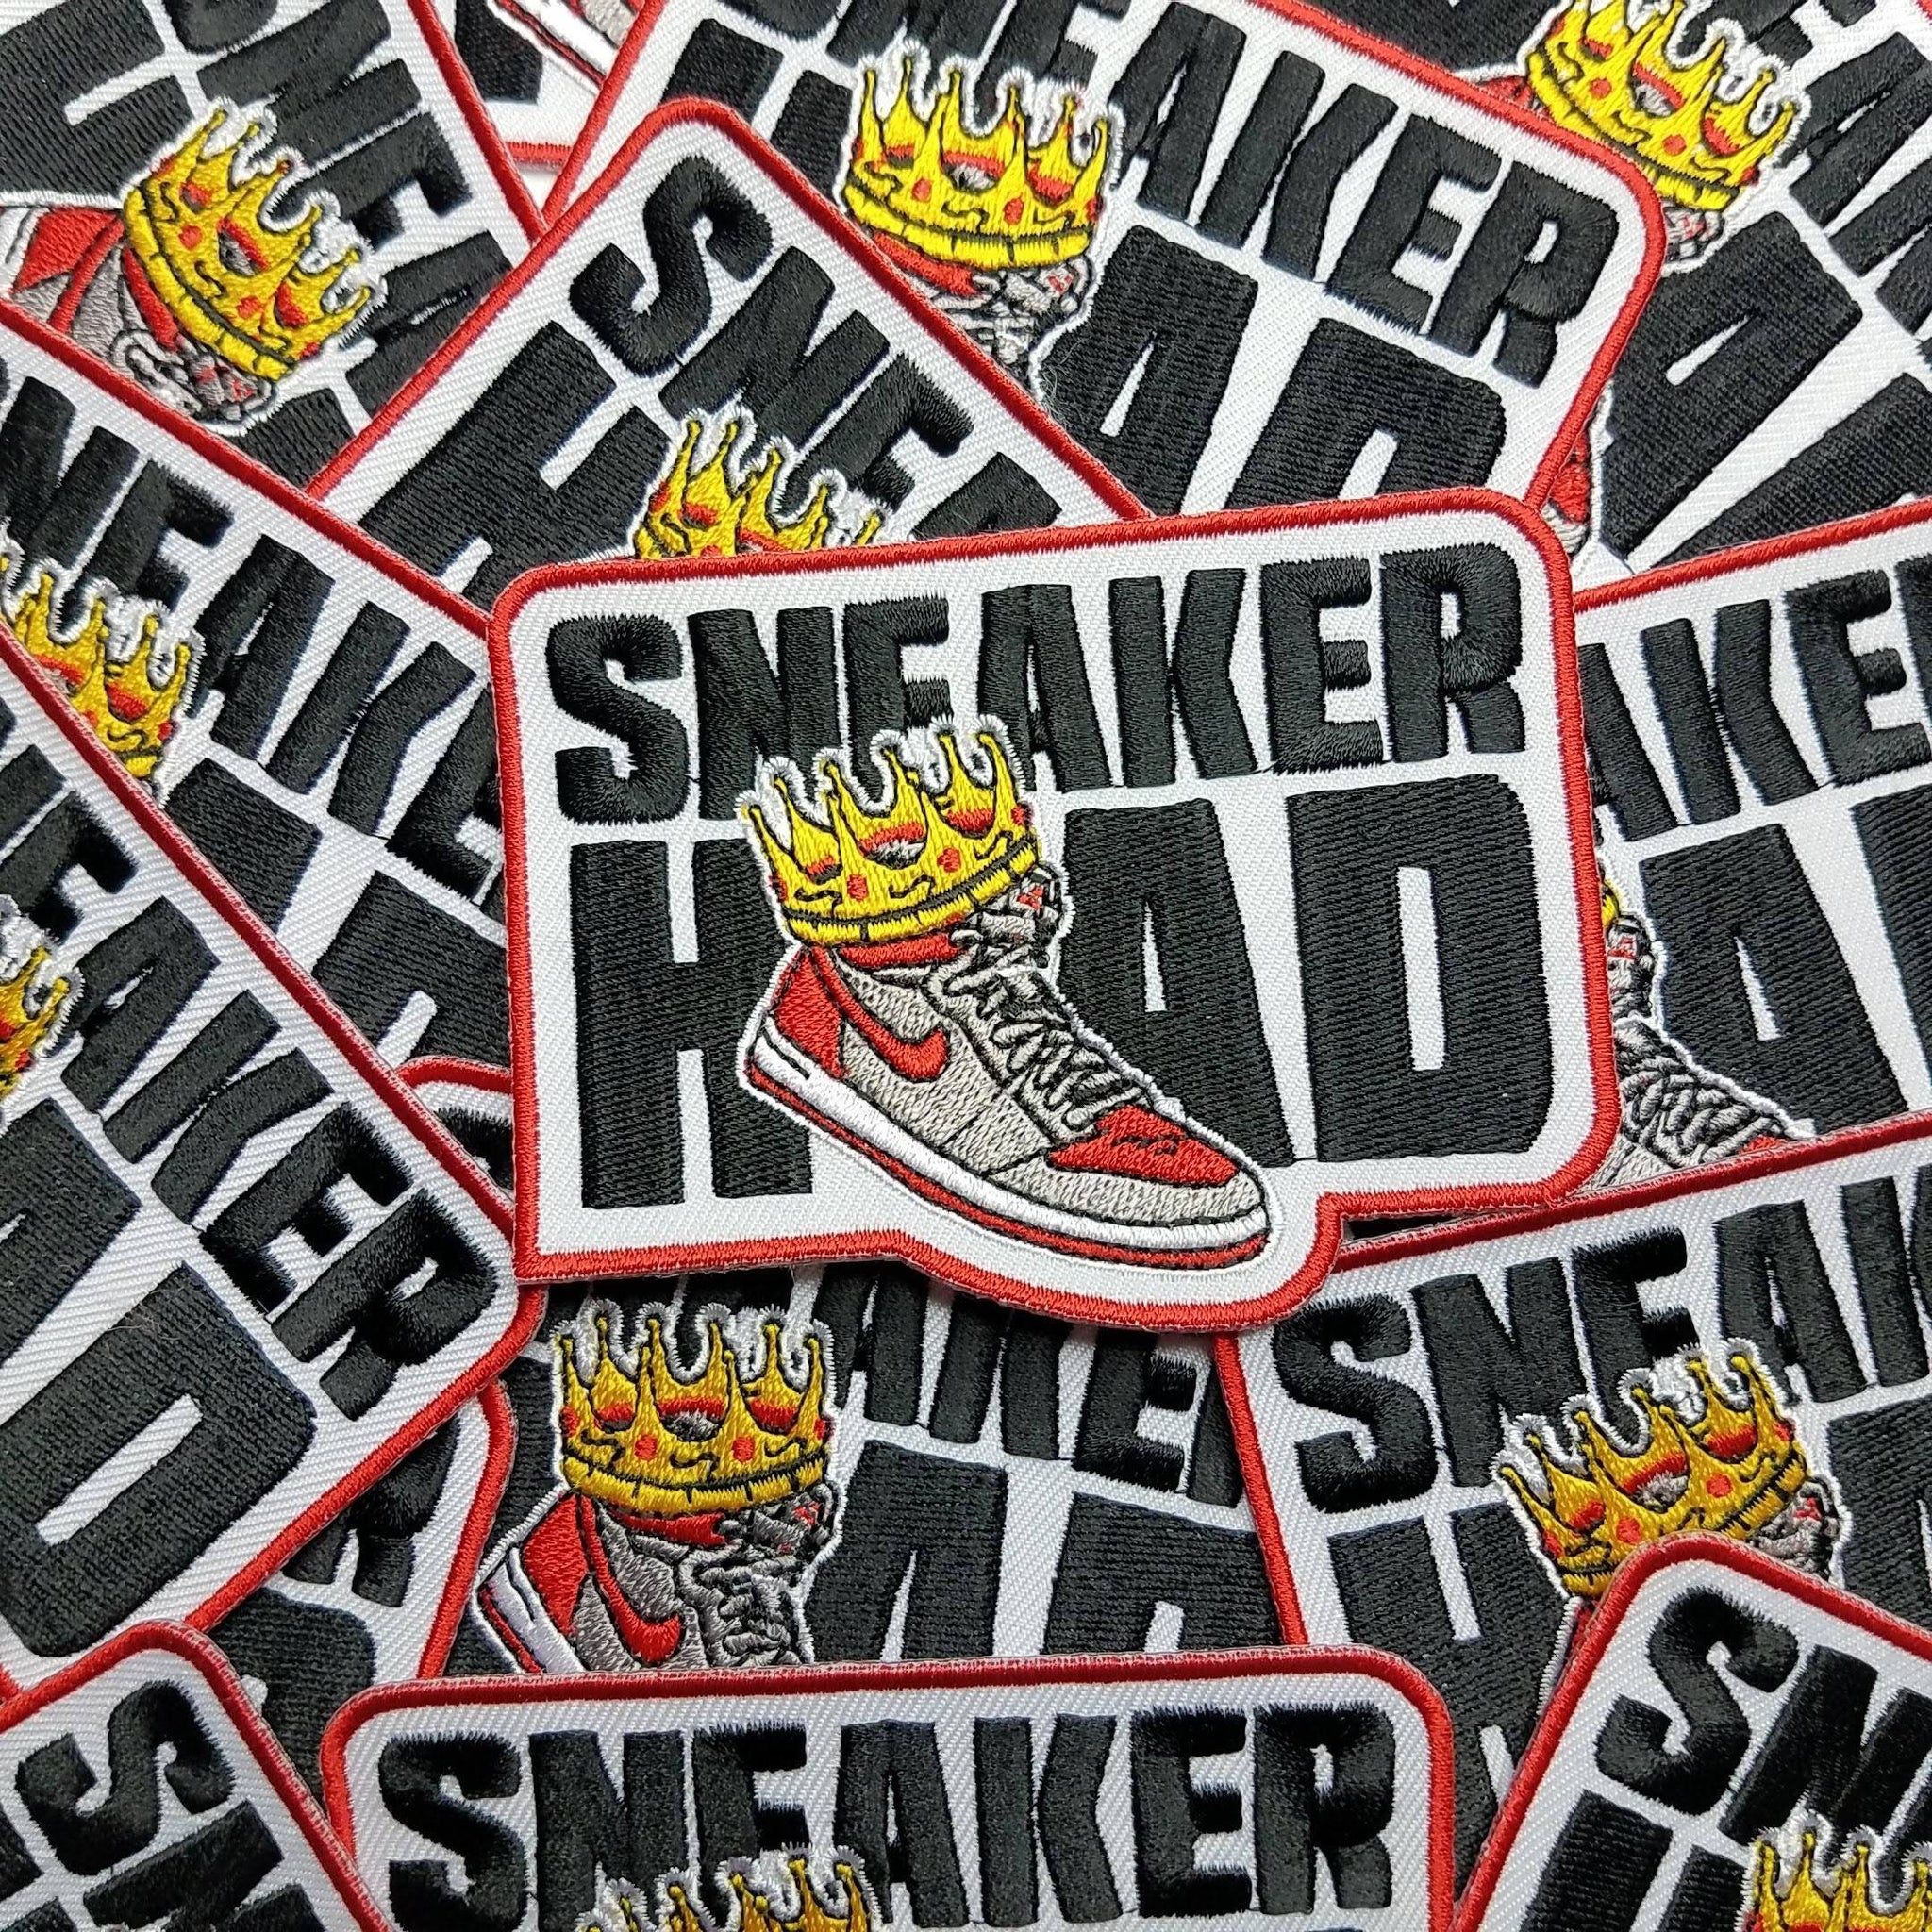 Sneaker Lover Applique, Fun, "Sneaker Head" Iron-On Embroidered Patch; Shoe Lover Patch, Patch for denim jackets, and Hats, Size 4"